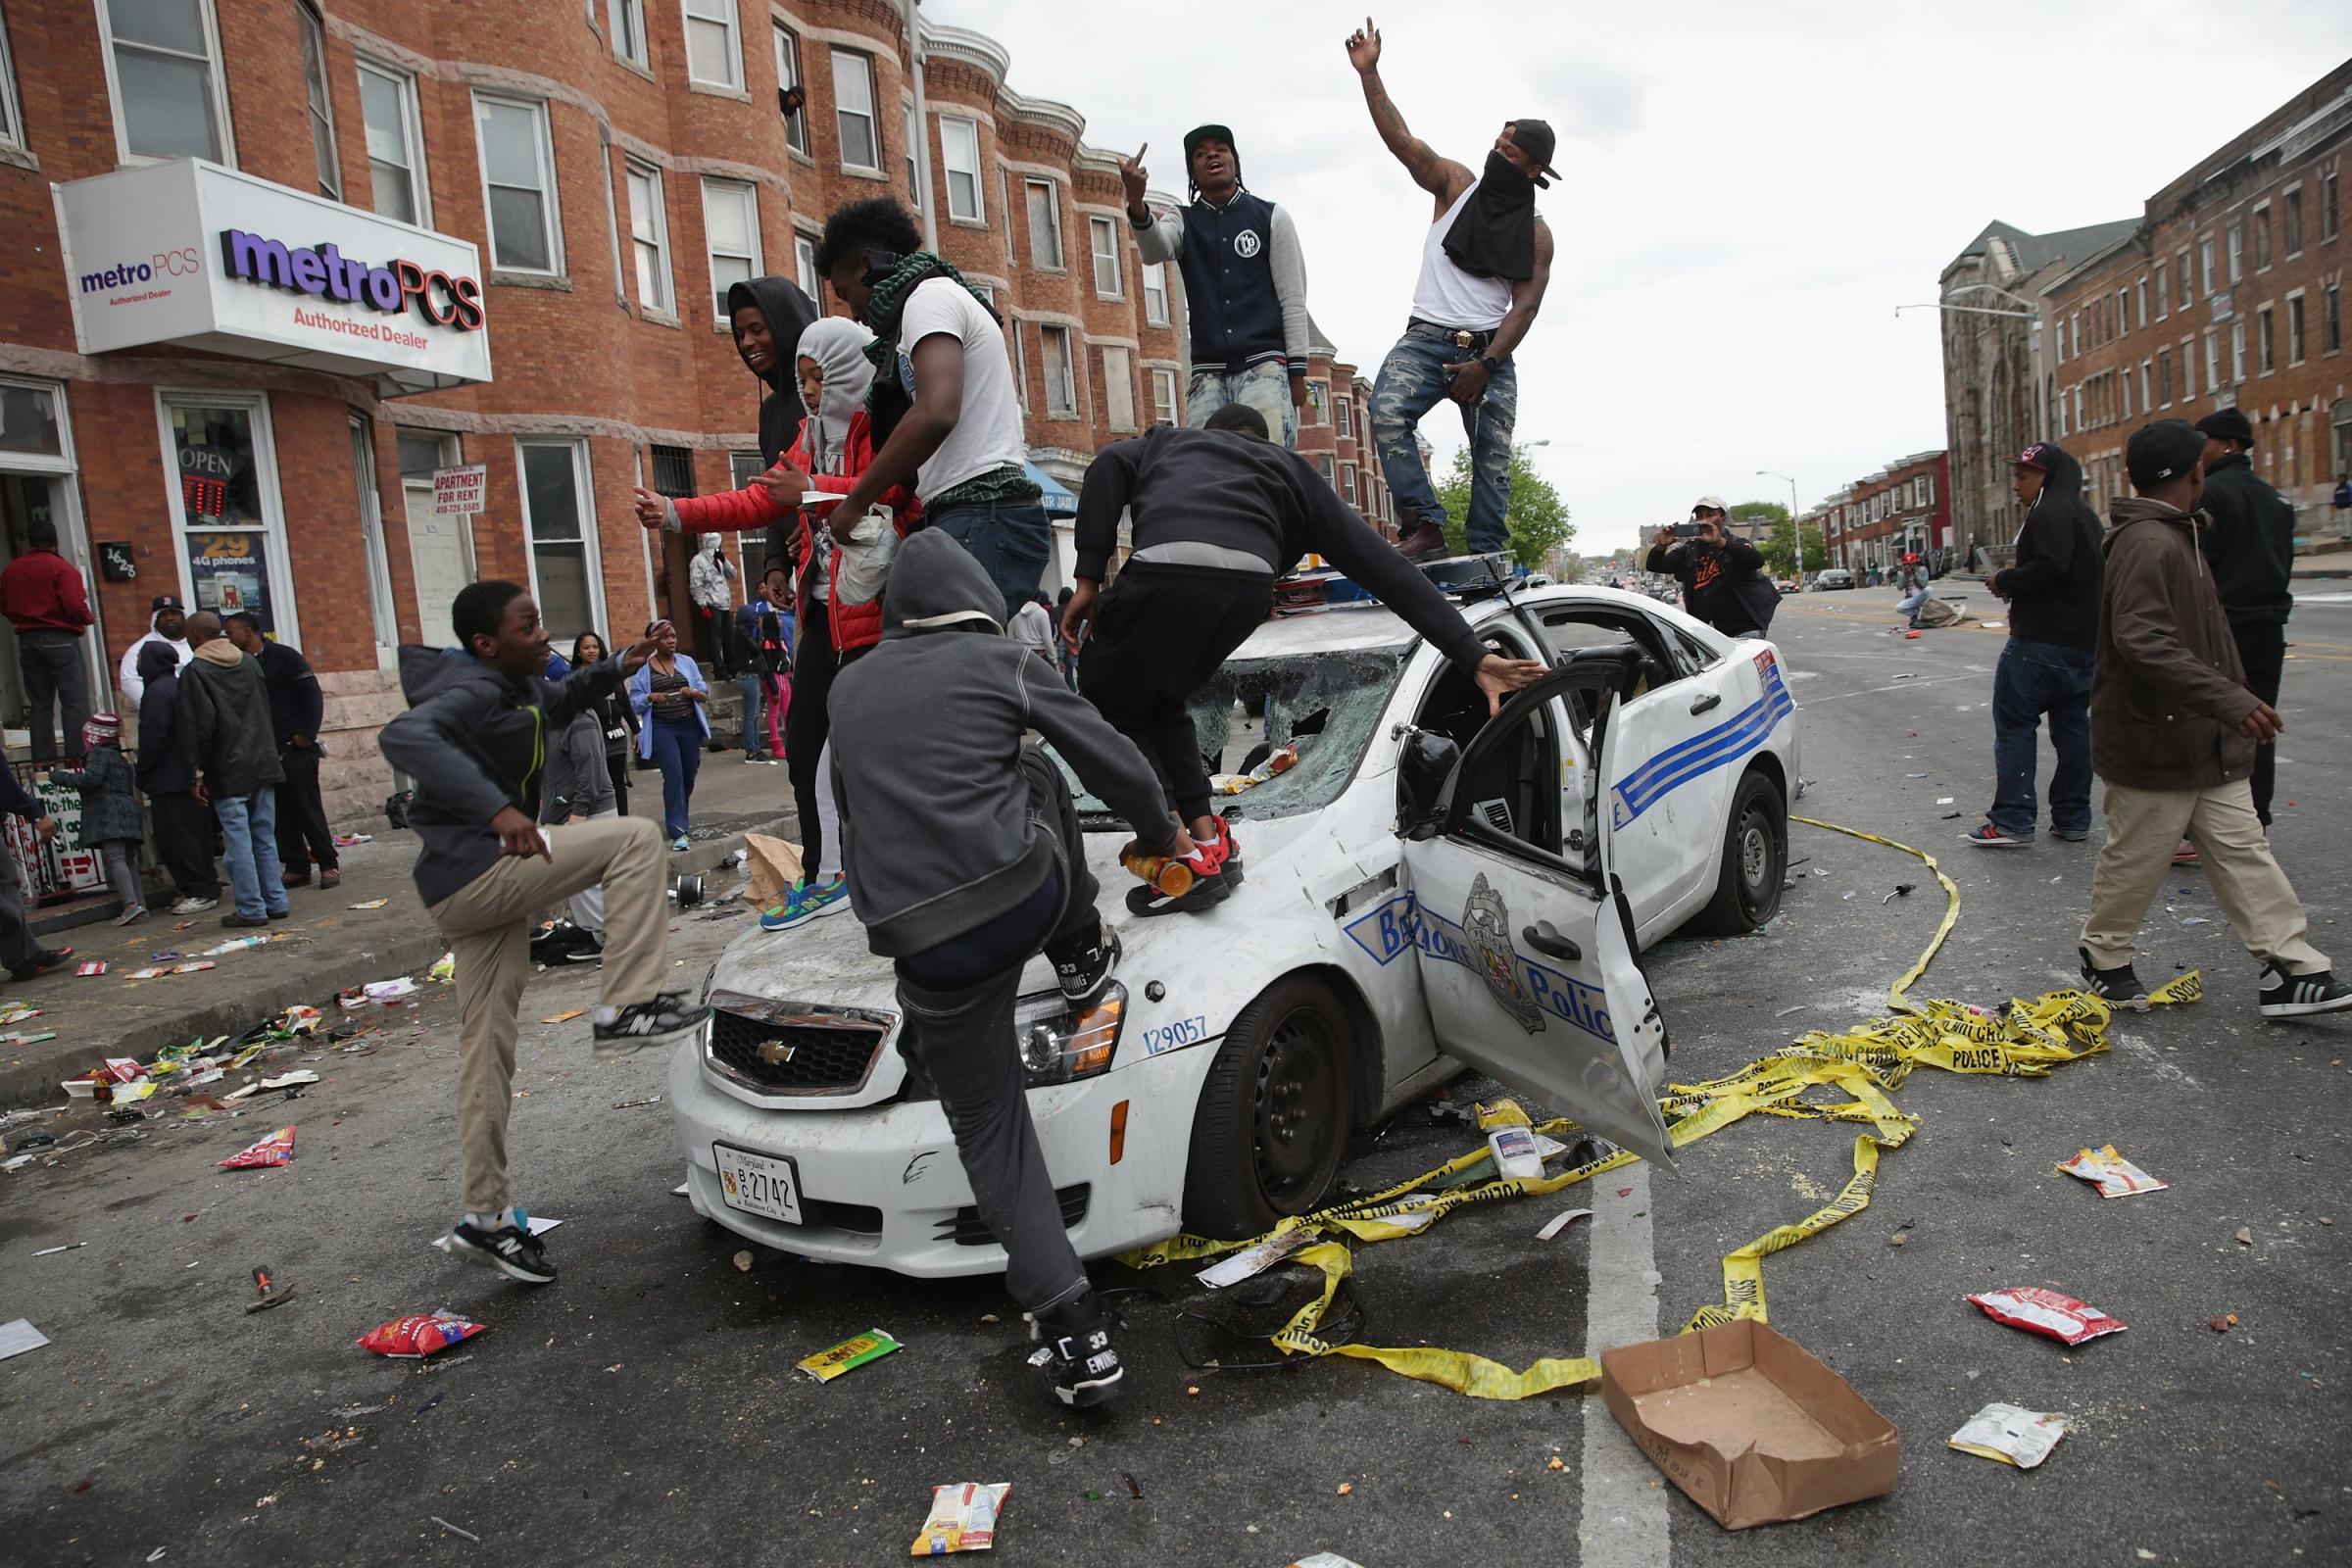 Demonstrators climb on a destroyed Baltimore Police car in the street near the corner of Pennsylvania and North avenues during violent protests following the funeral of Freddie Gray in Baltimore on April 27, 2015.